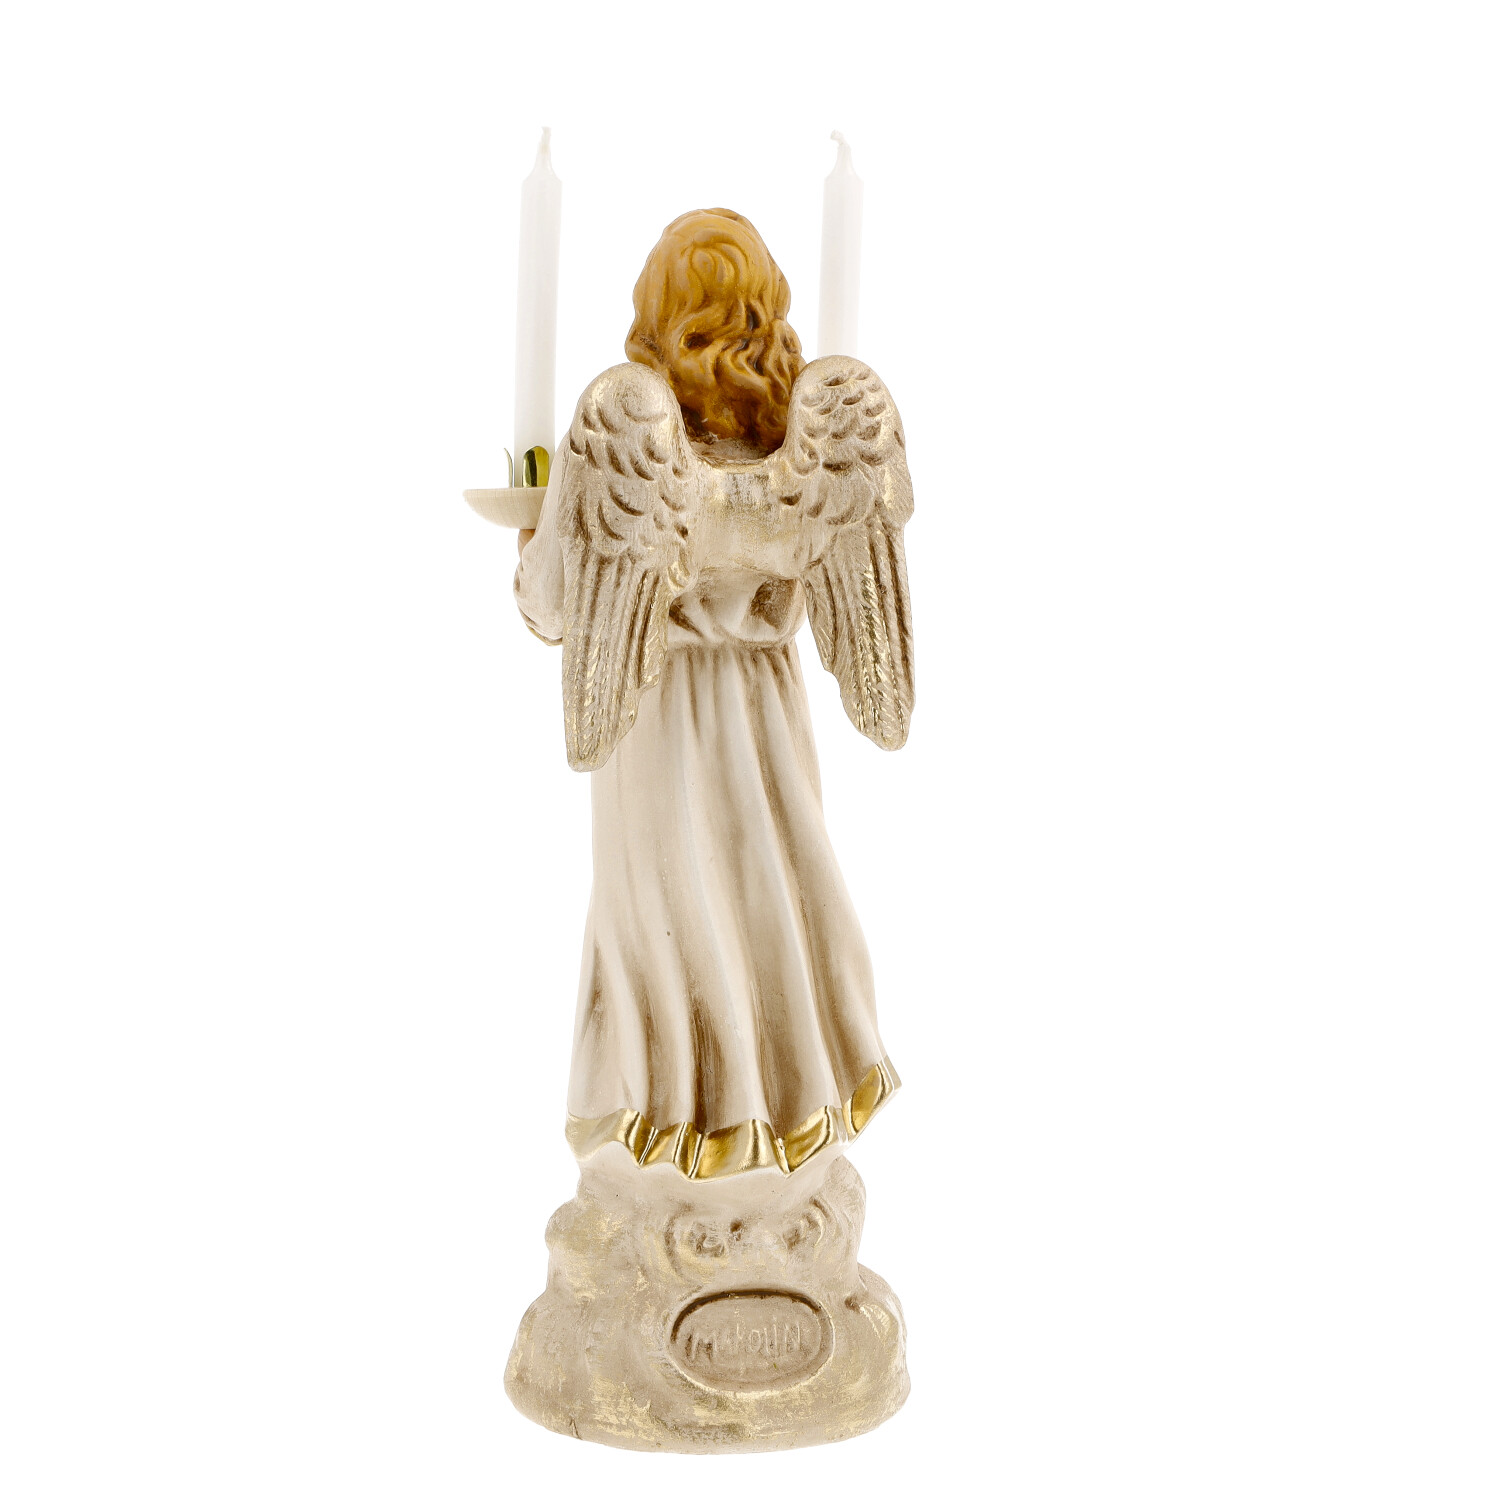 Angel with candles - Marolin Germany - handpainted